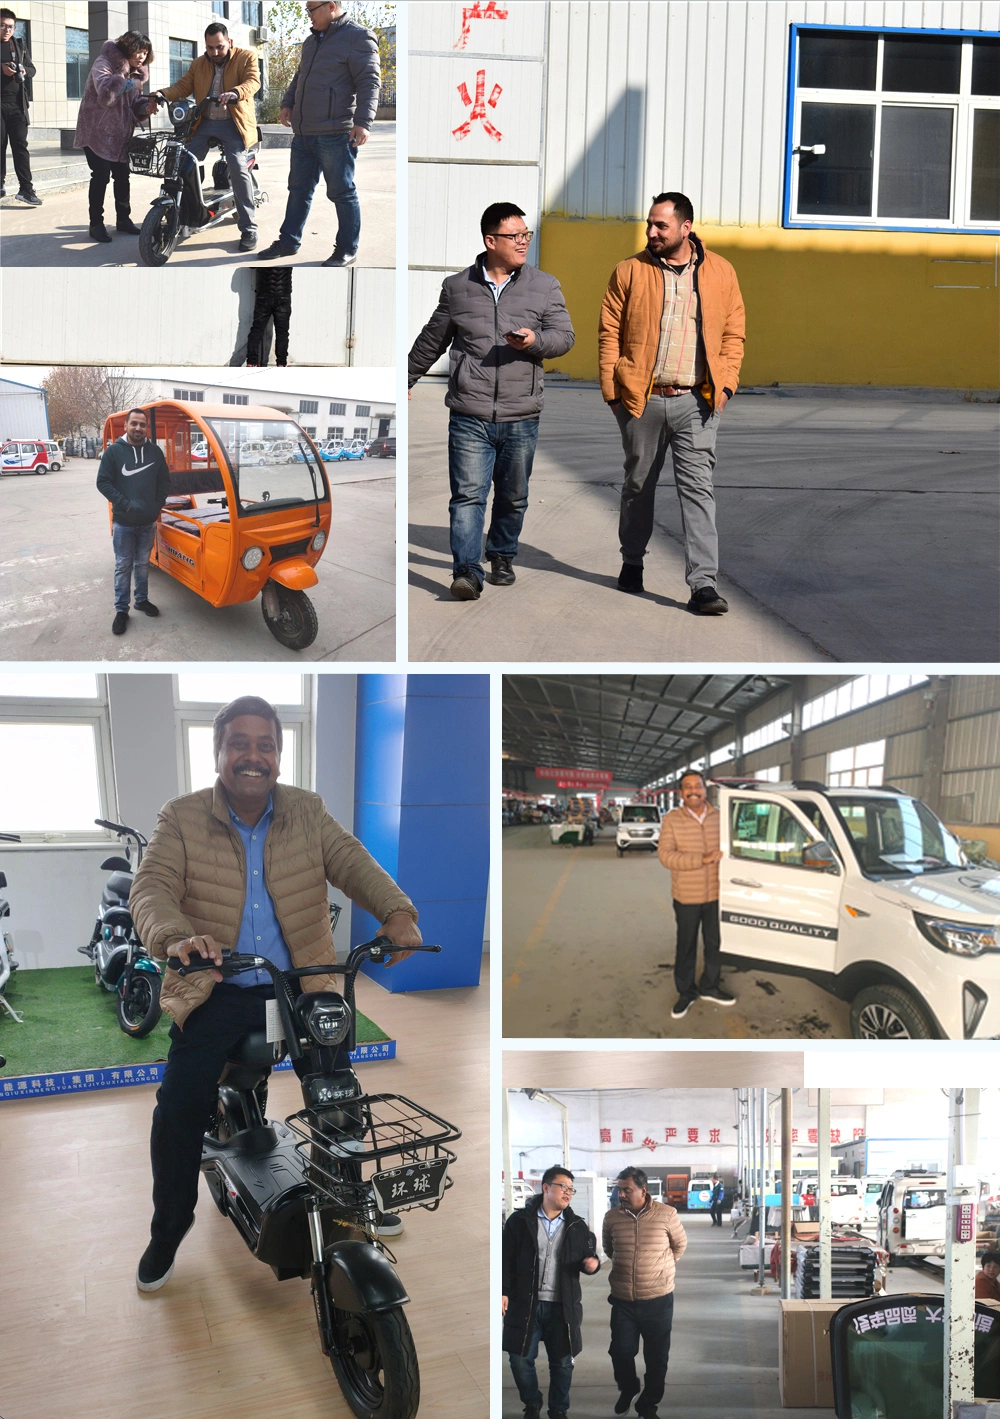 500W /1000W 60V/ 48V Fat Tyre Three Wheel One Seat Electric Scooter, Electric Vehicle, Electric Tricycle for Passenger